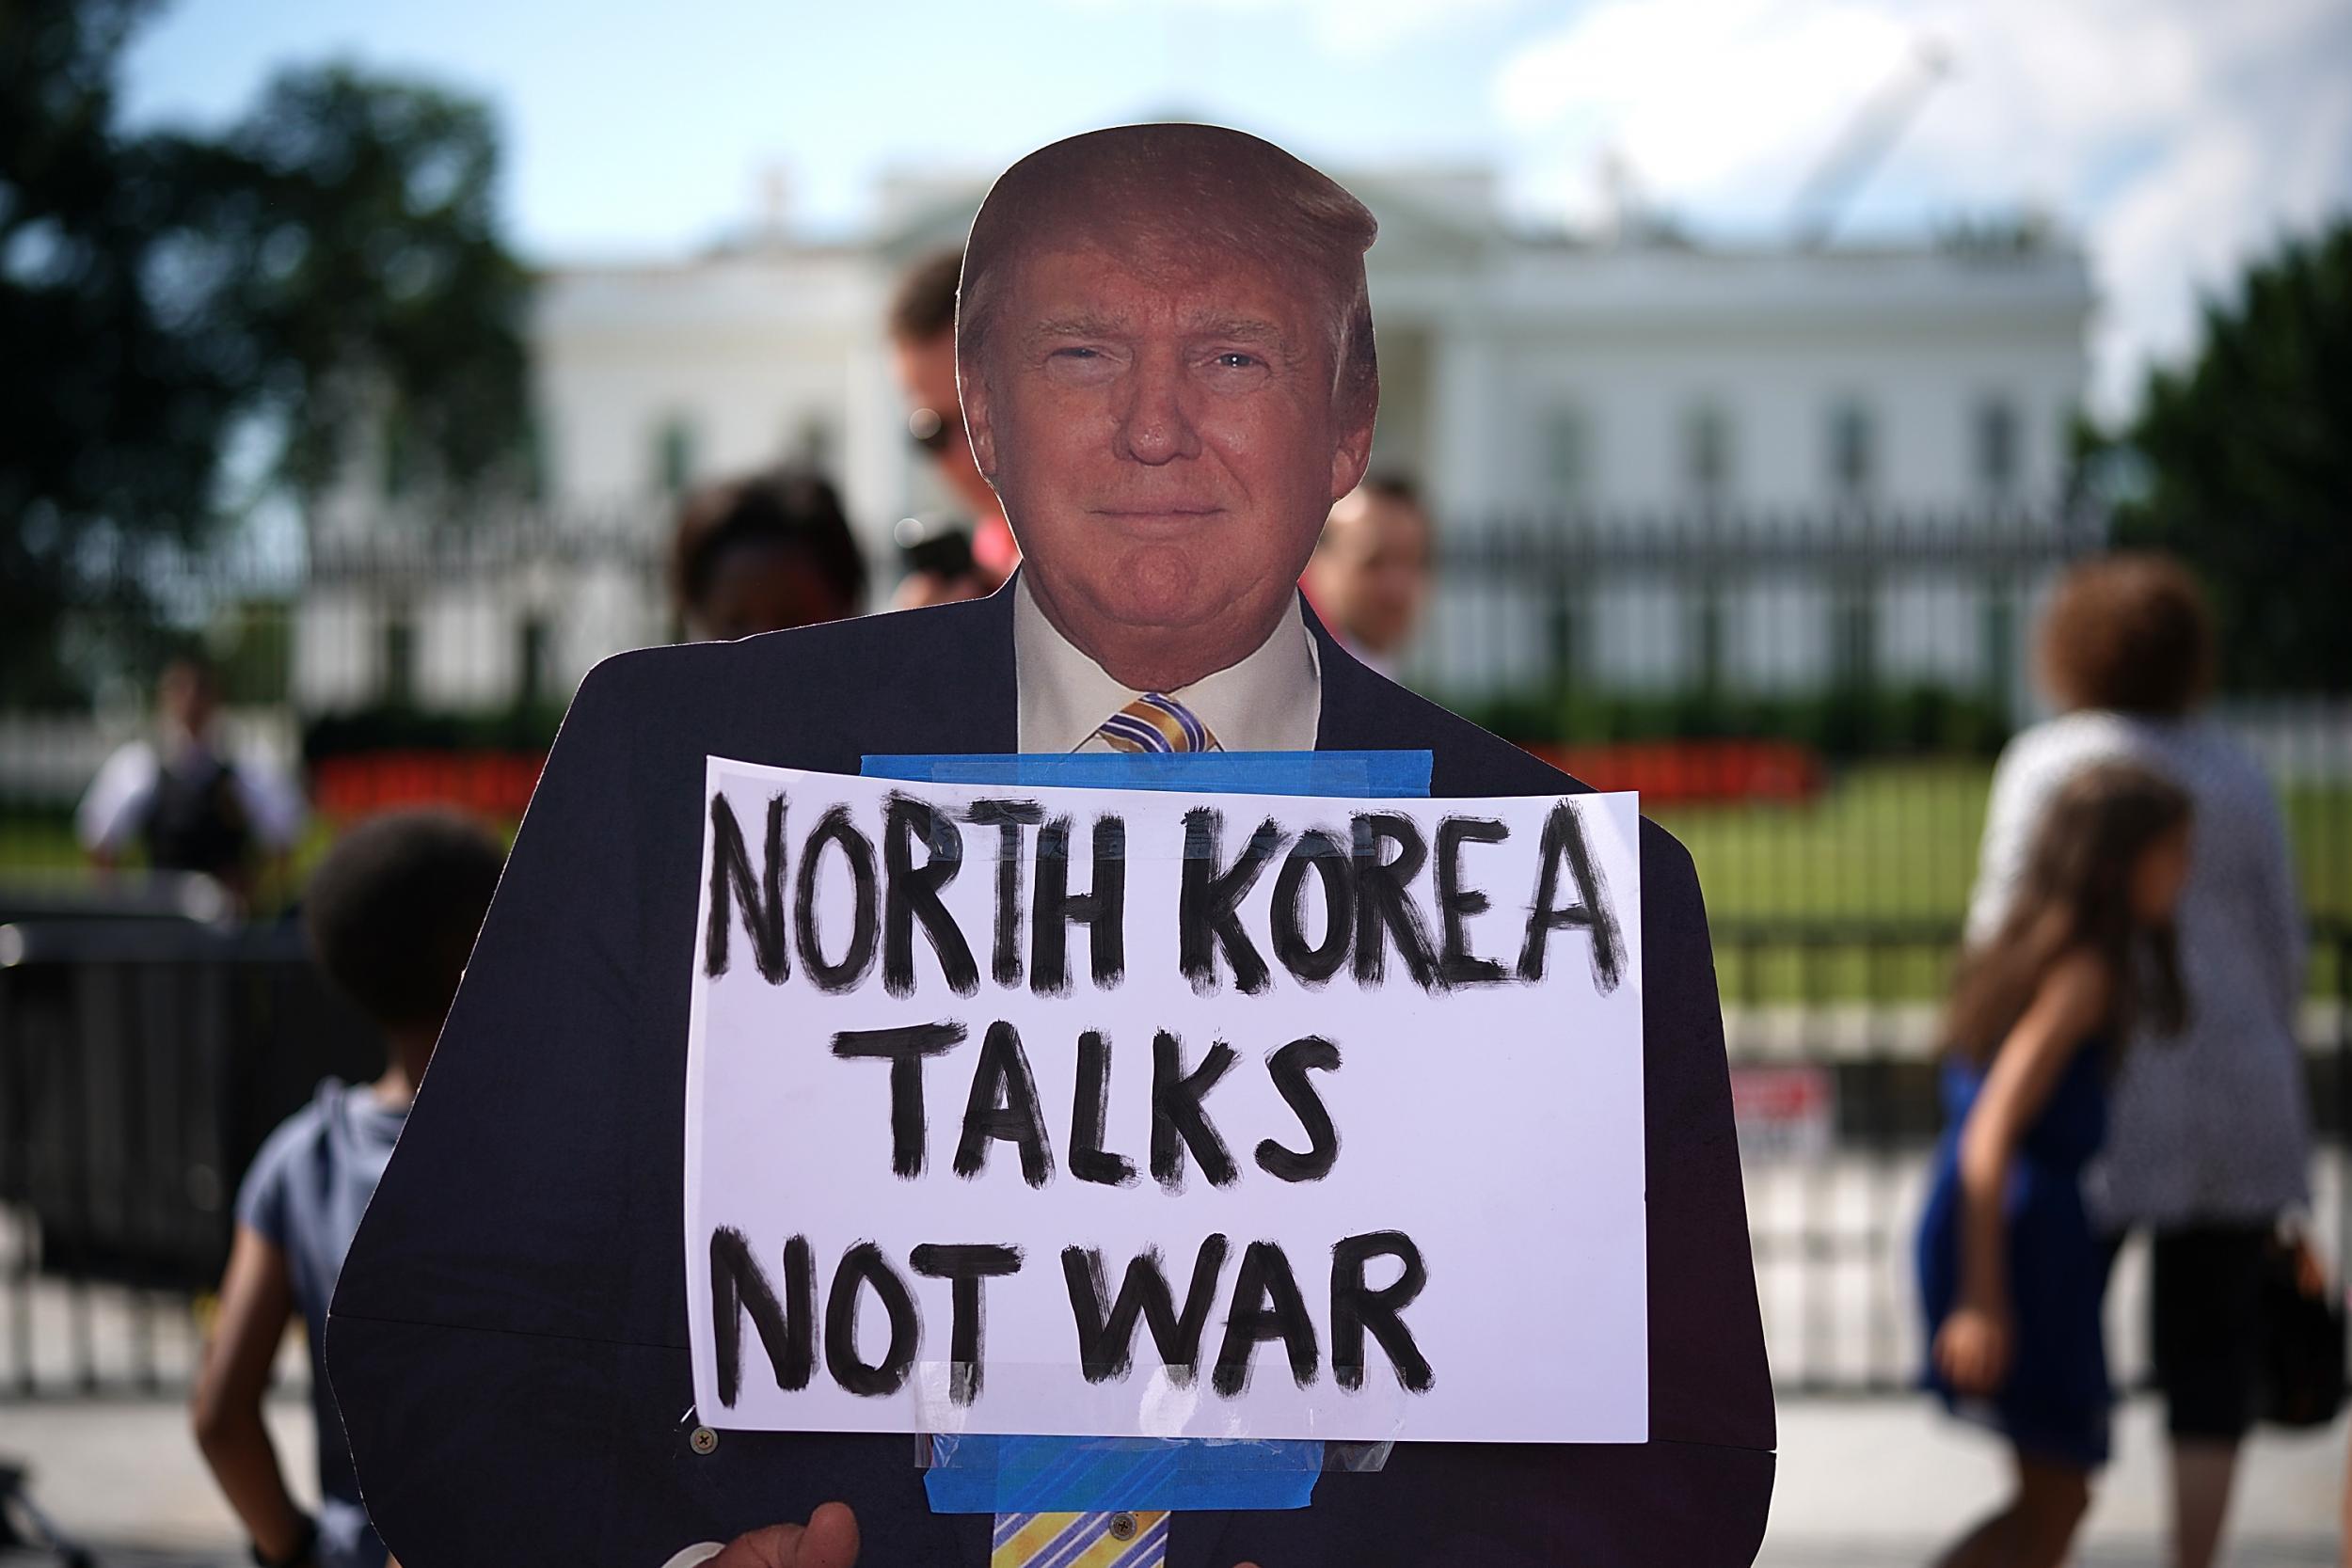 A cardboard cutout of US President Donald Trump is shown during a protest against escalating threats of military action in North Korea